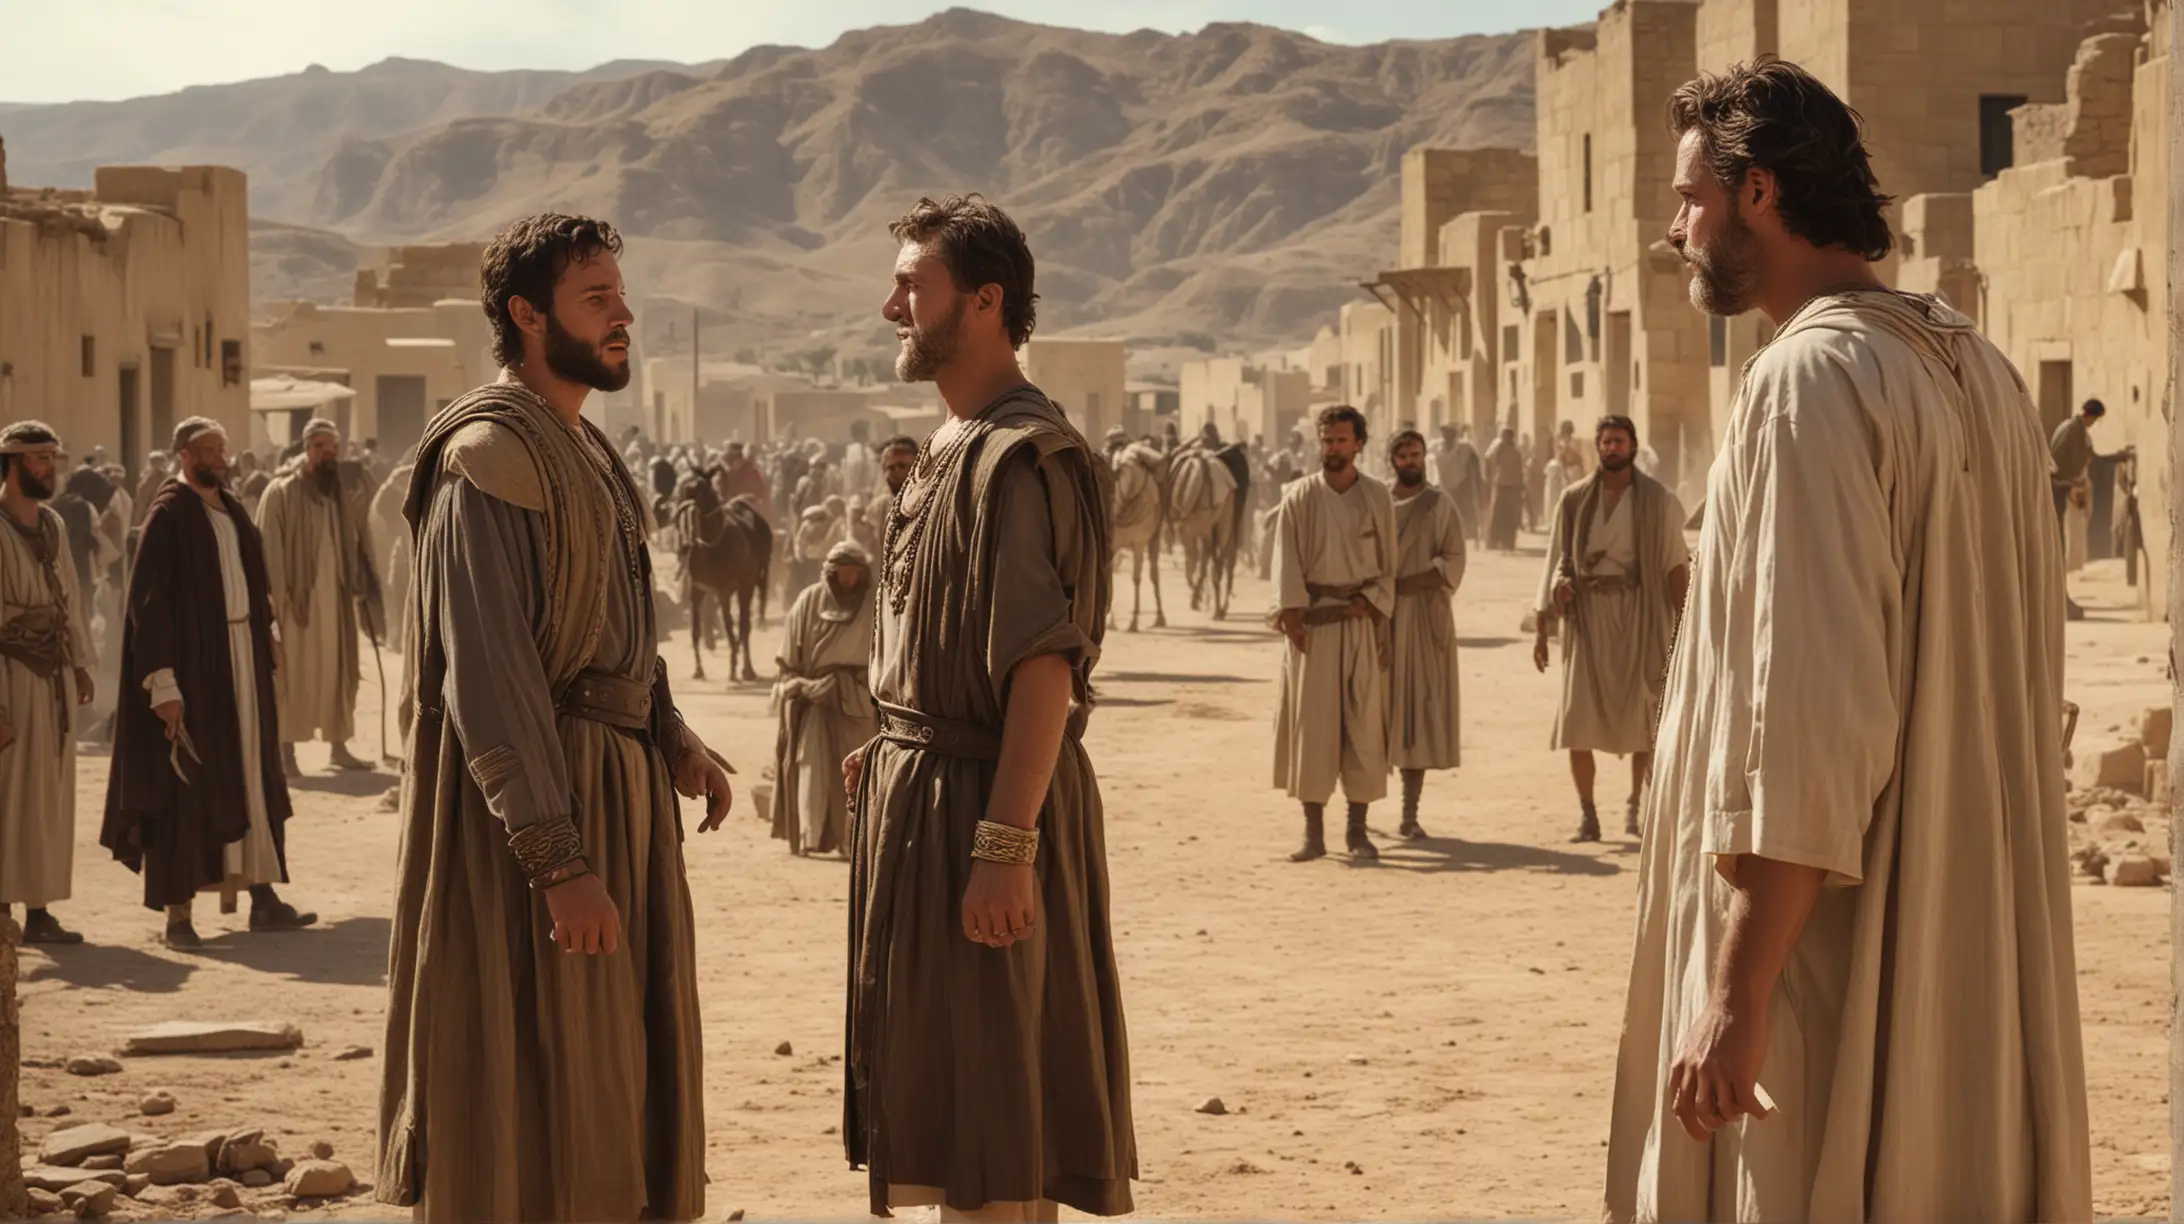 A wealthy man and another man talking in a Desert city. Some other people in the background. Set during the biblical era of Joshua.